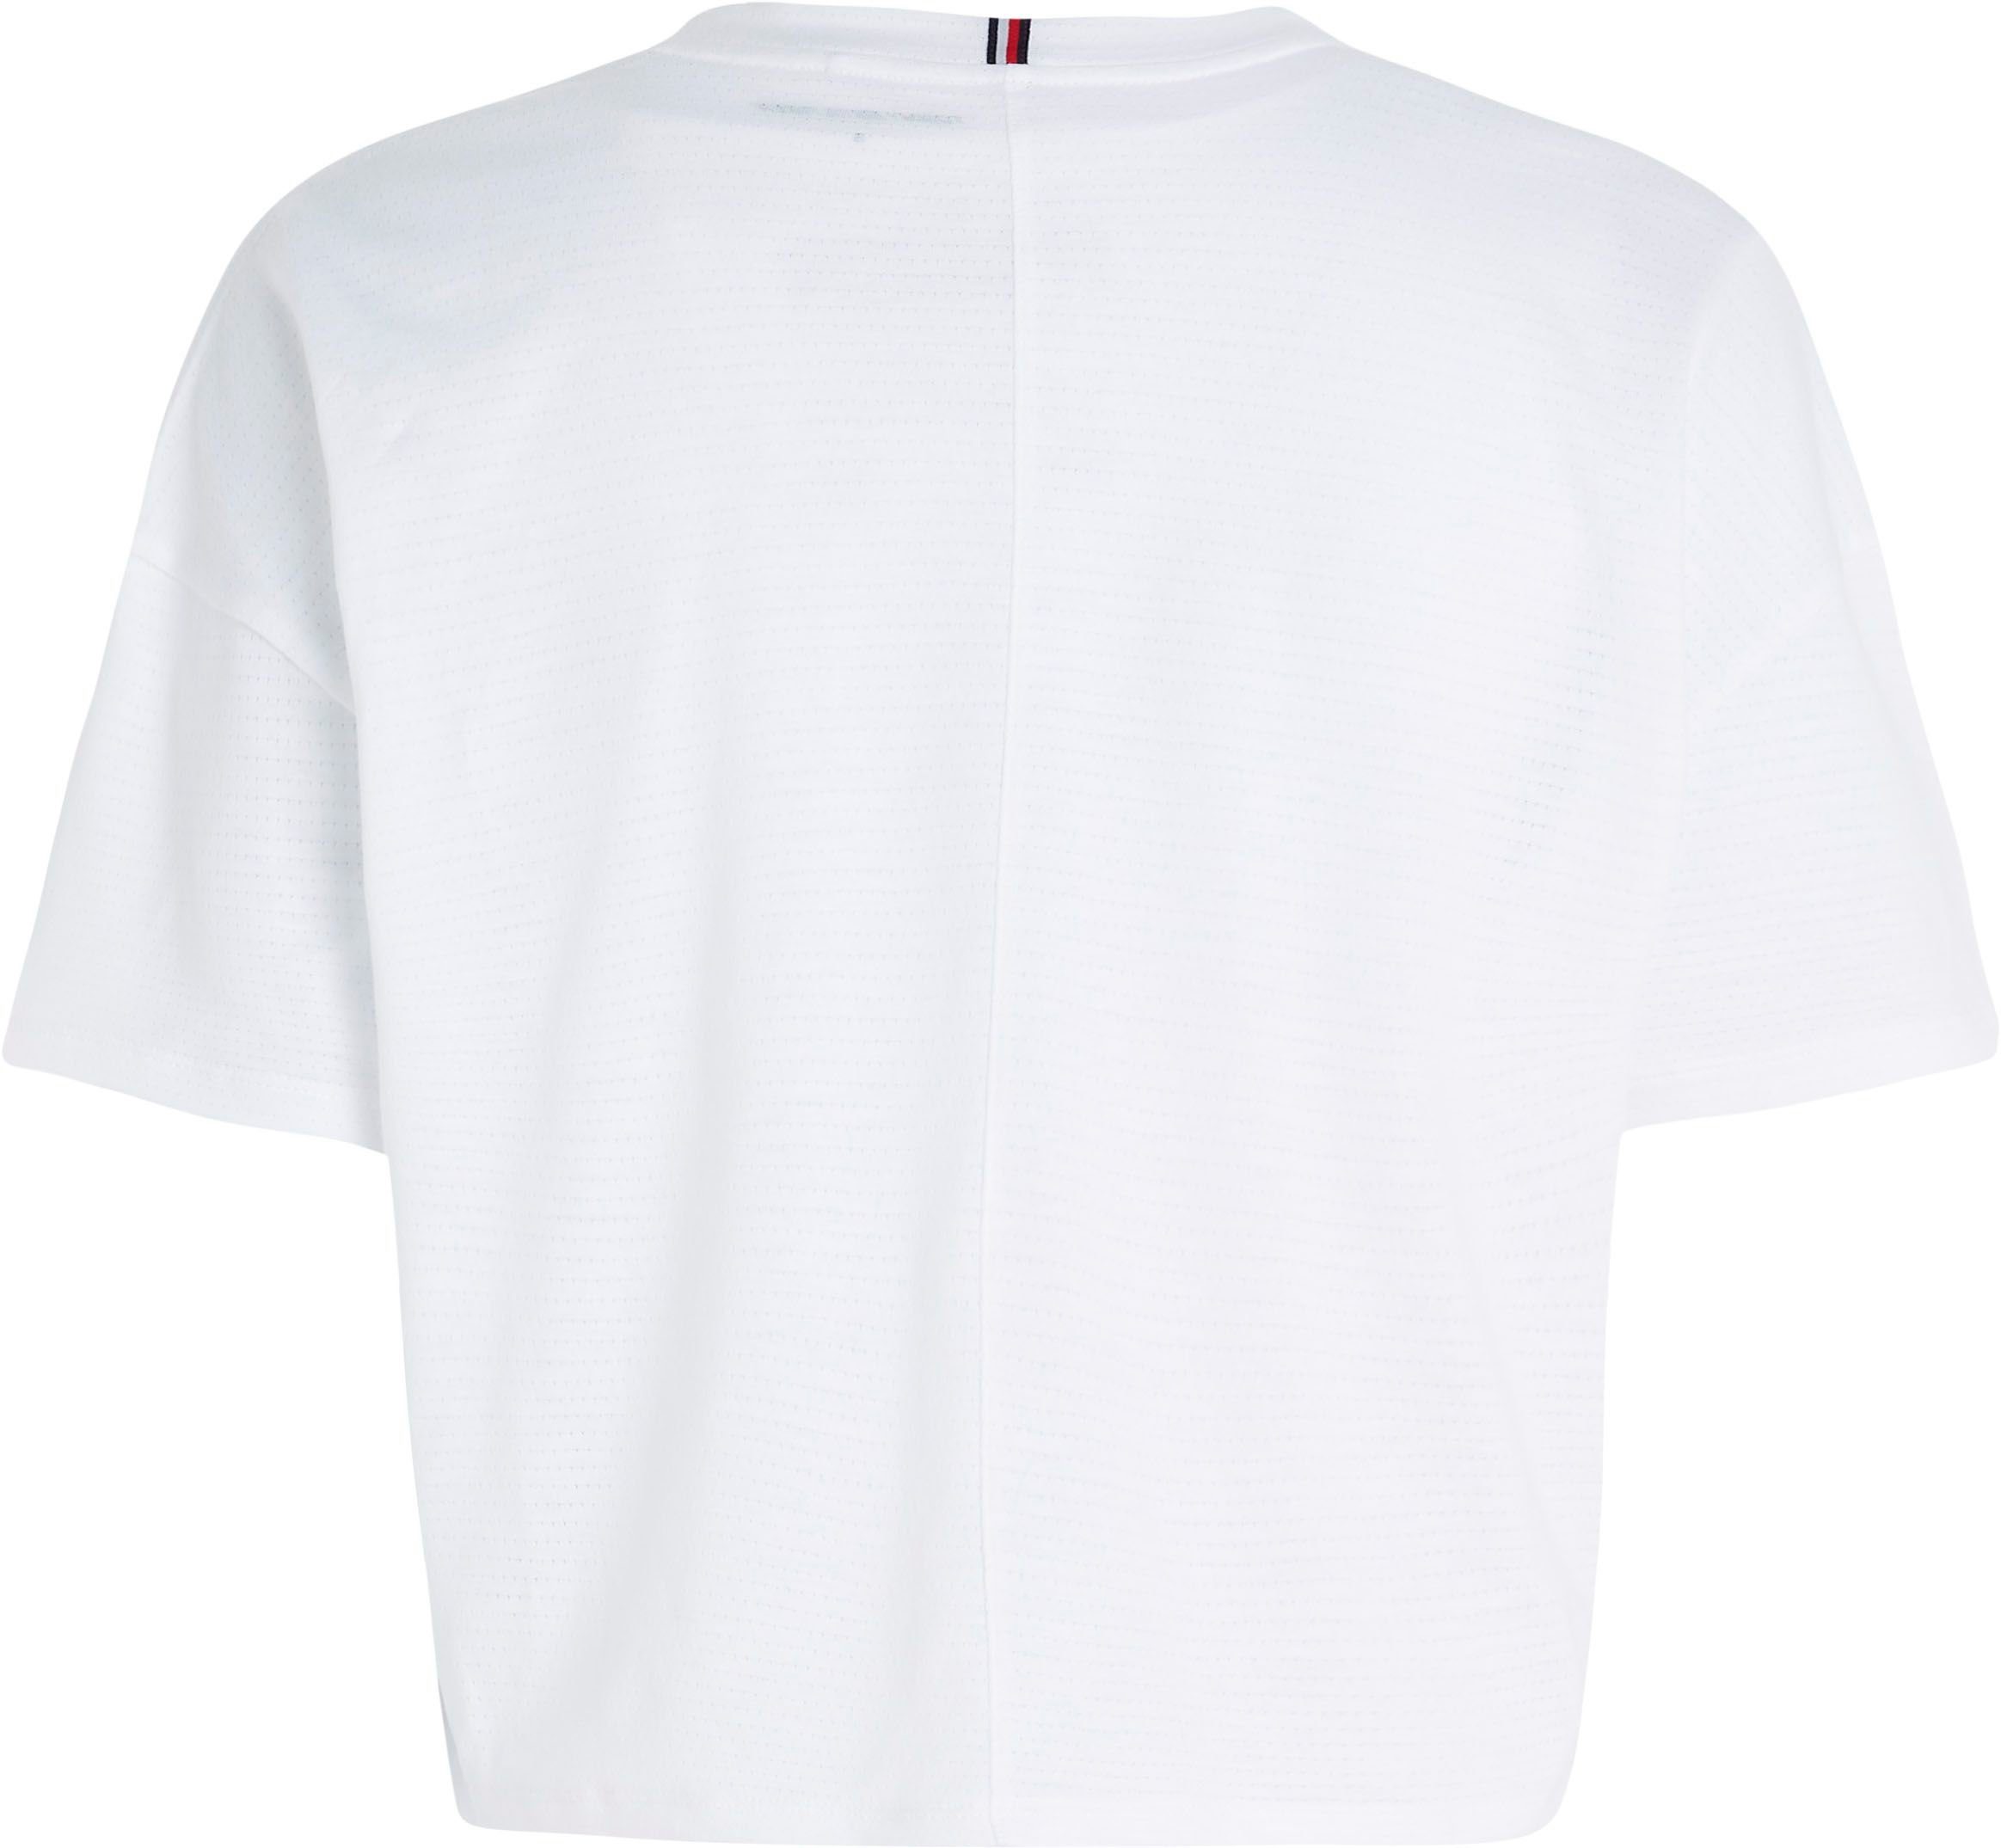 Tommy Hilfiger Sport T-Shirt ESSENTIALS in TEE modischer RELAXED CROPPED Form Th-Optic-White cropped